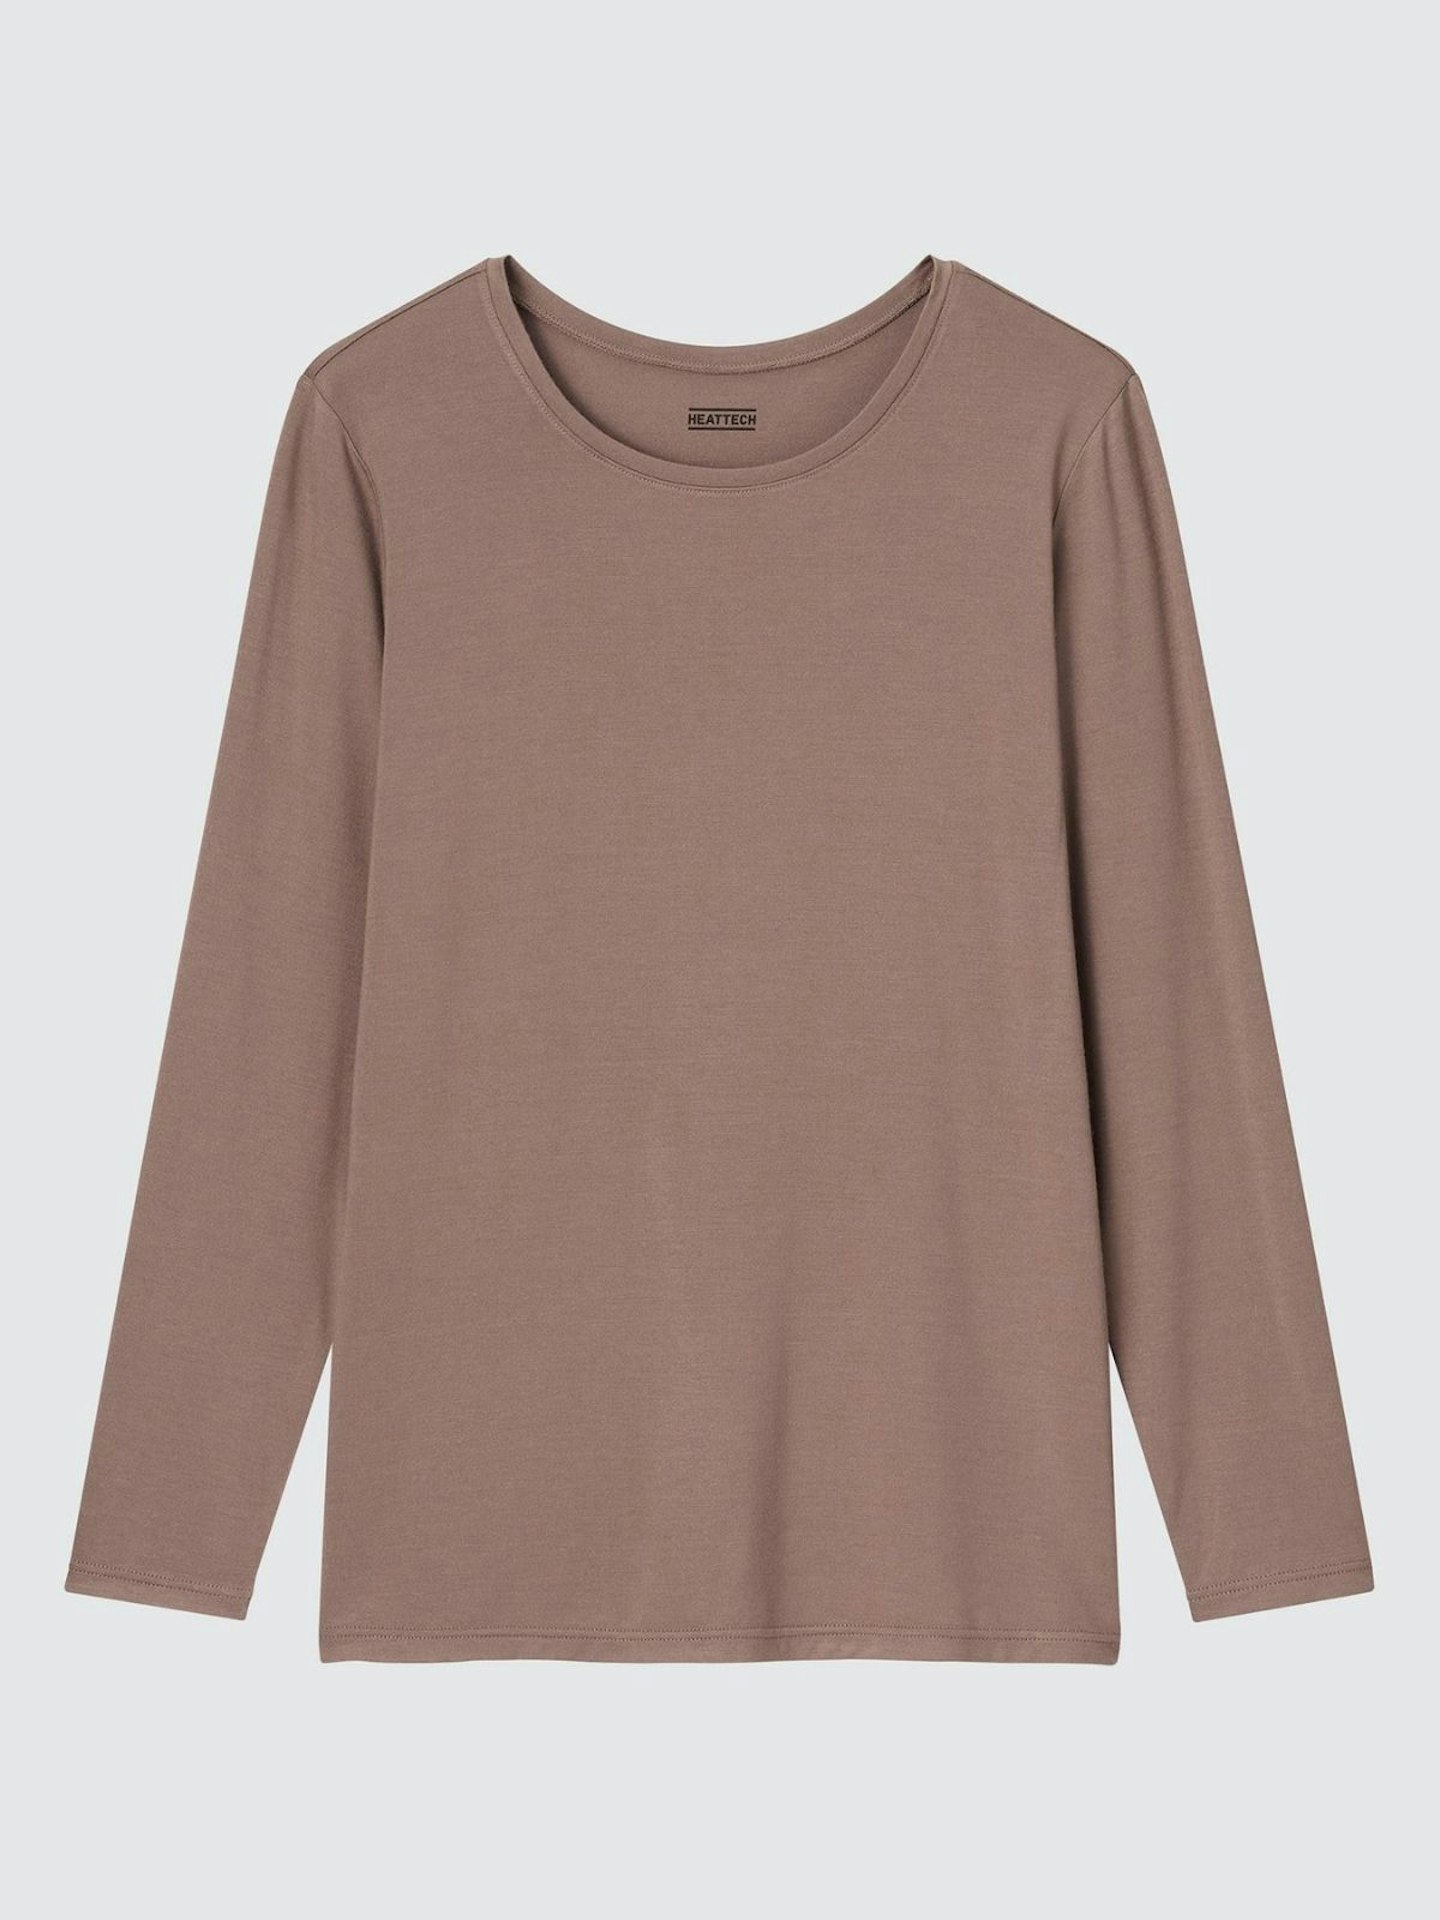 UNIQLO, Heat-Tech Crew Neck Long Sleeved Thermal Top